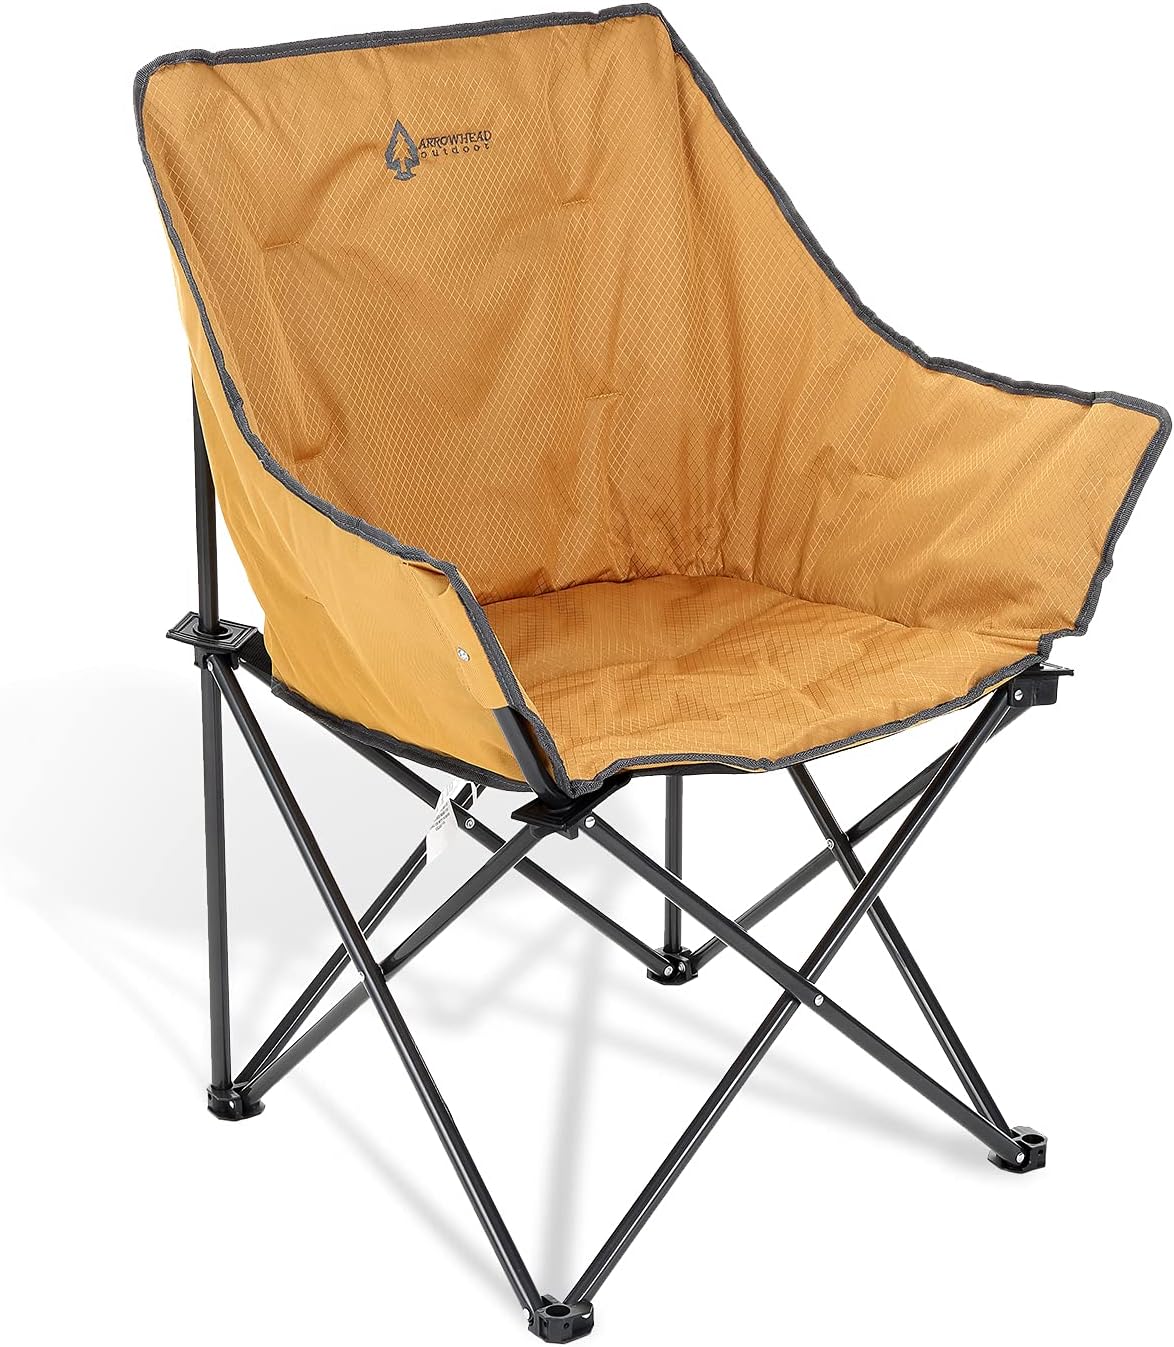 ARROWHEAD OUTDOOR Multi-Function 3-in-1 Compact Camp Chair